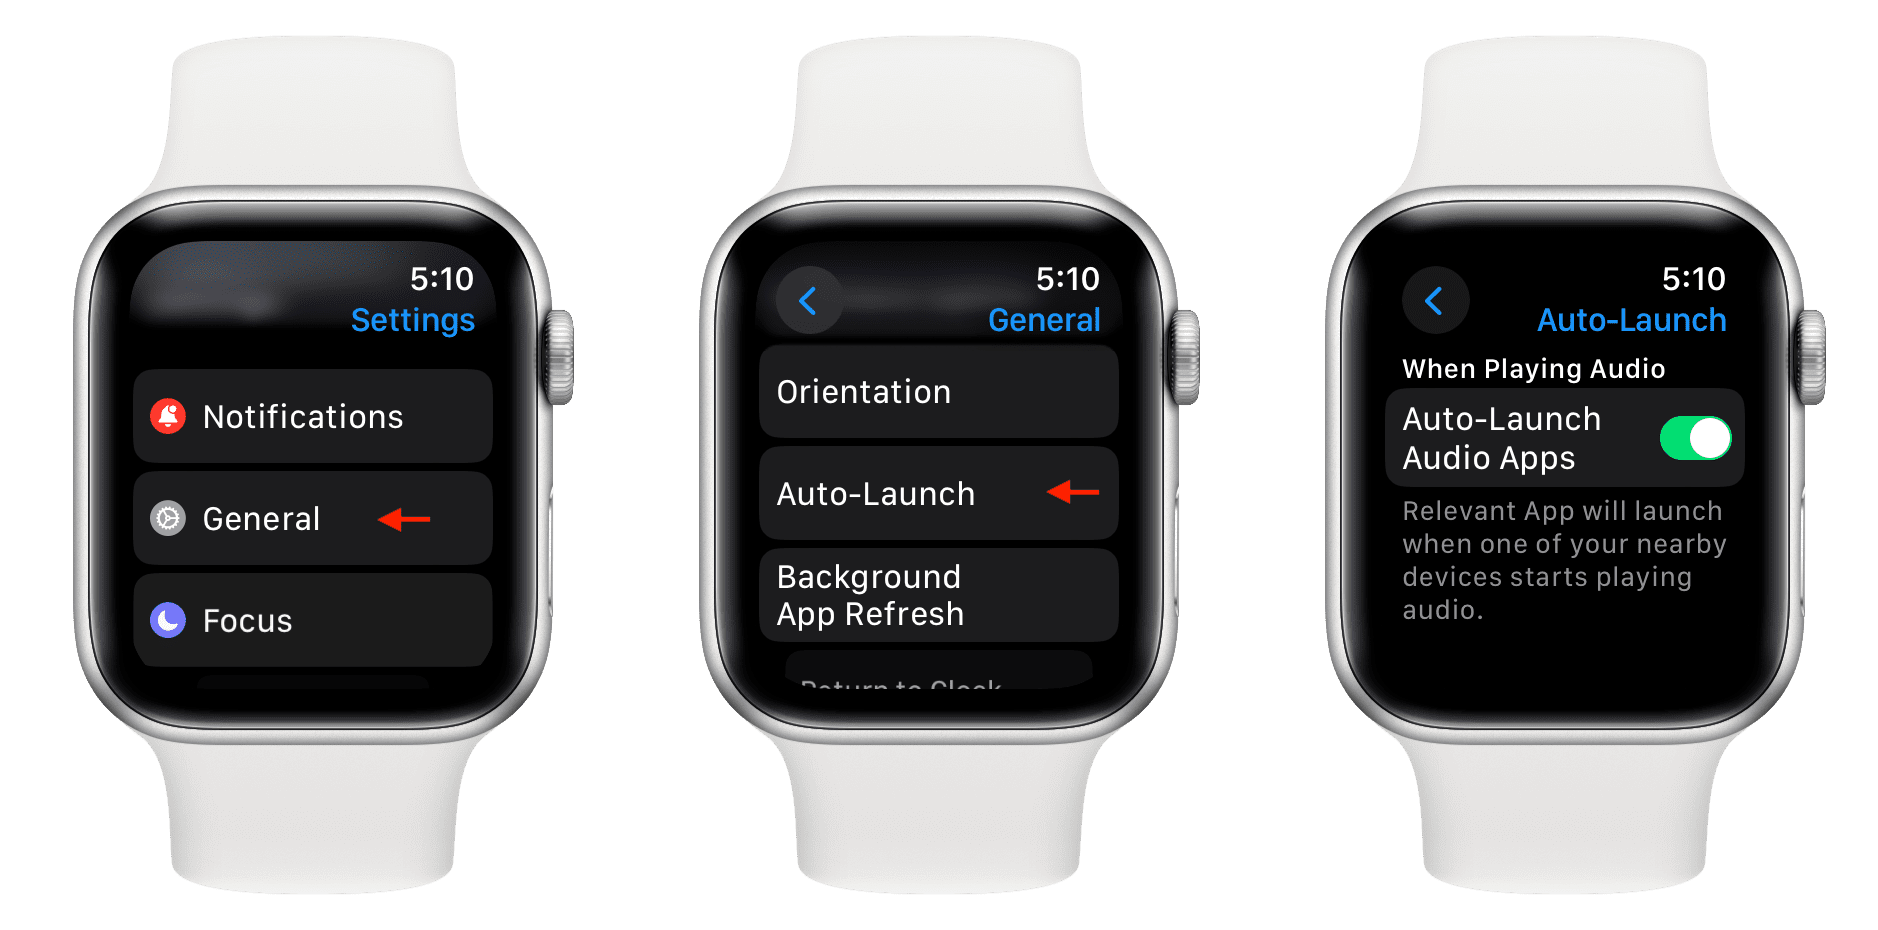 Auto-Launch Audio Apps in Apple Watch settings